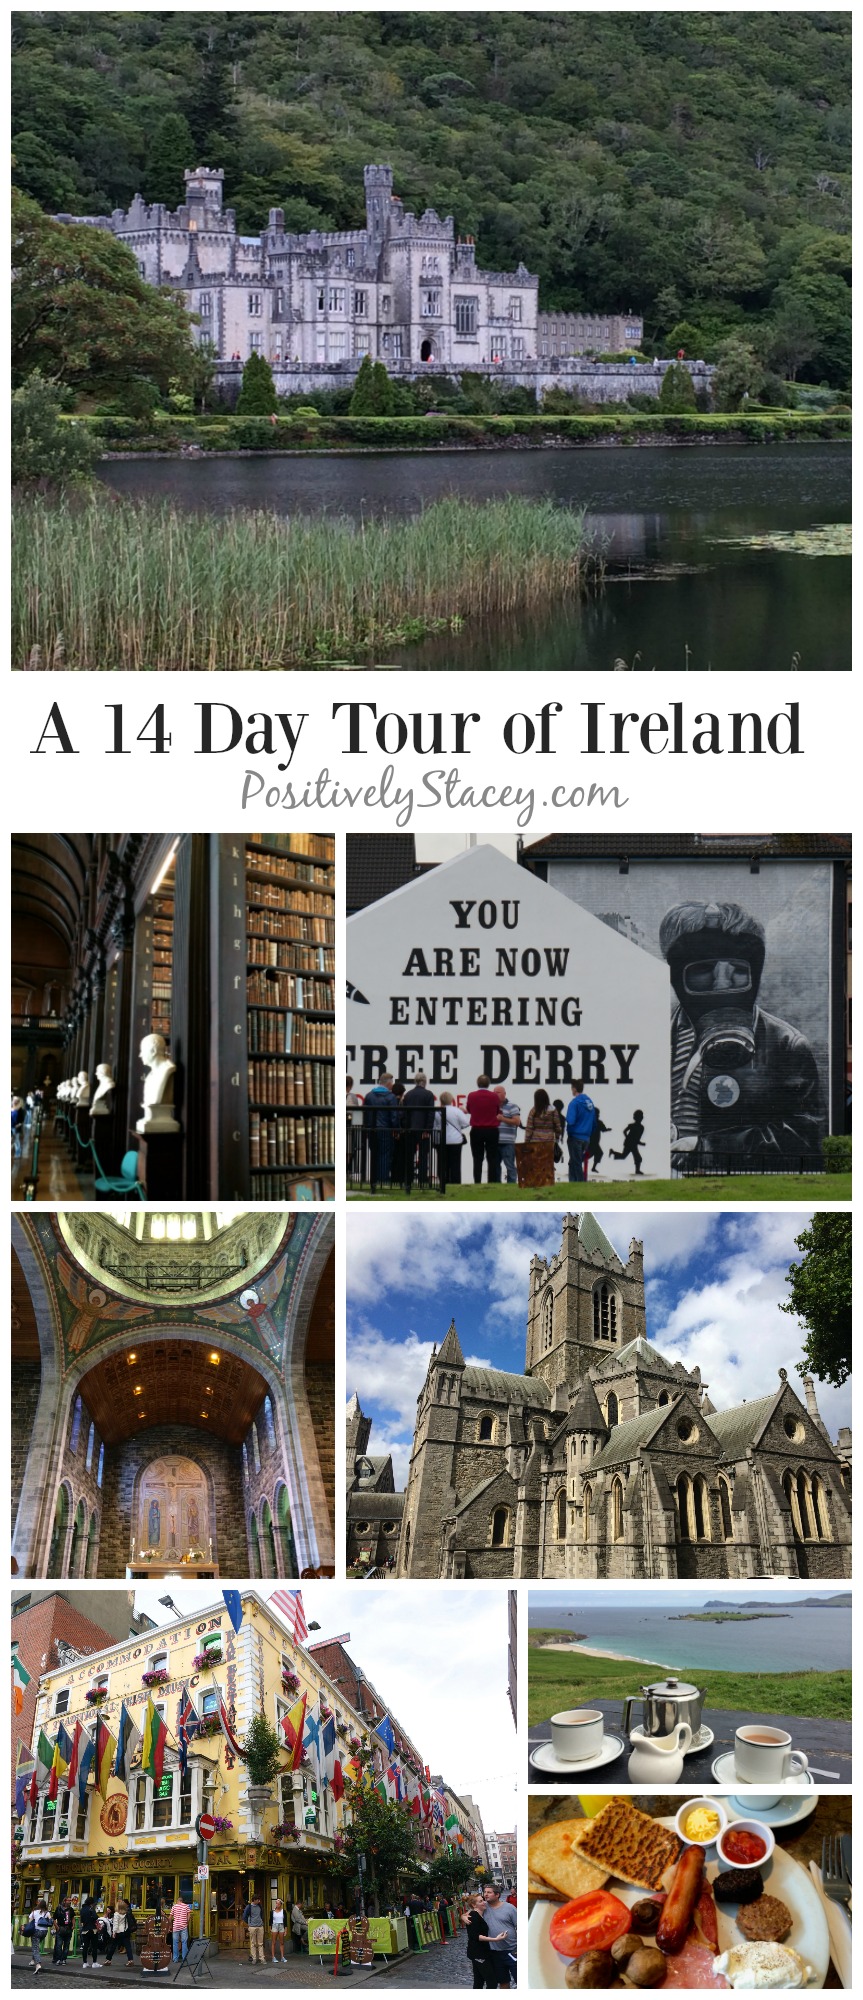 Our Ireland Itinerary - A 14 Day Tour of the Island